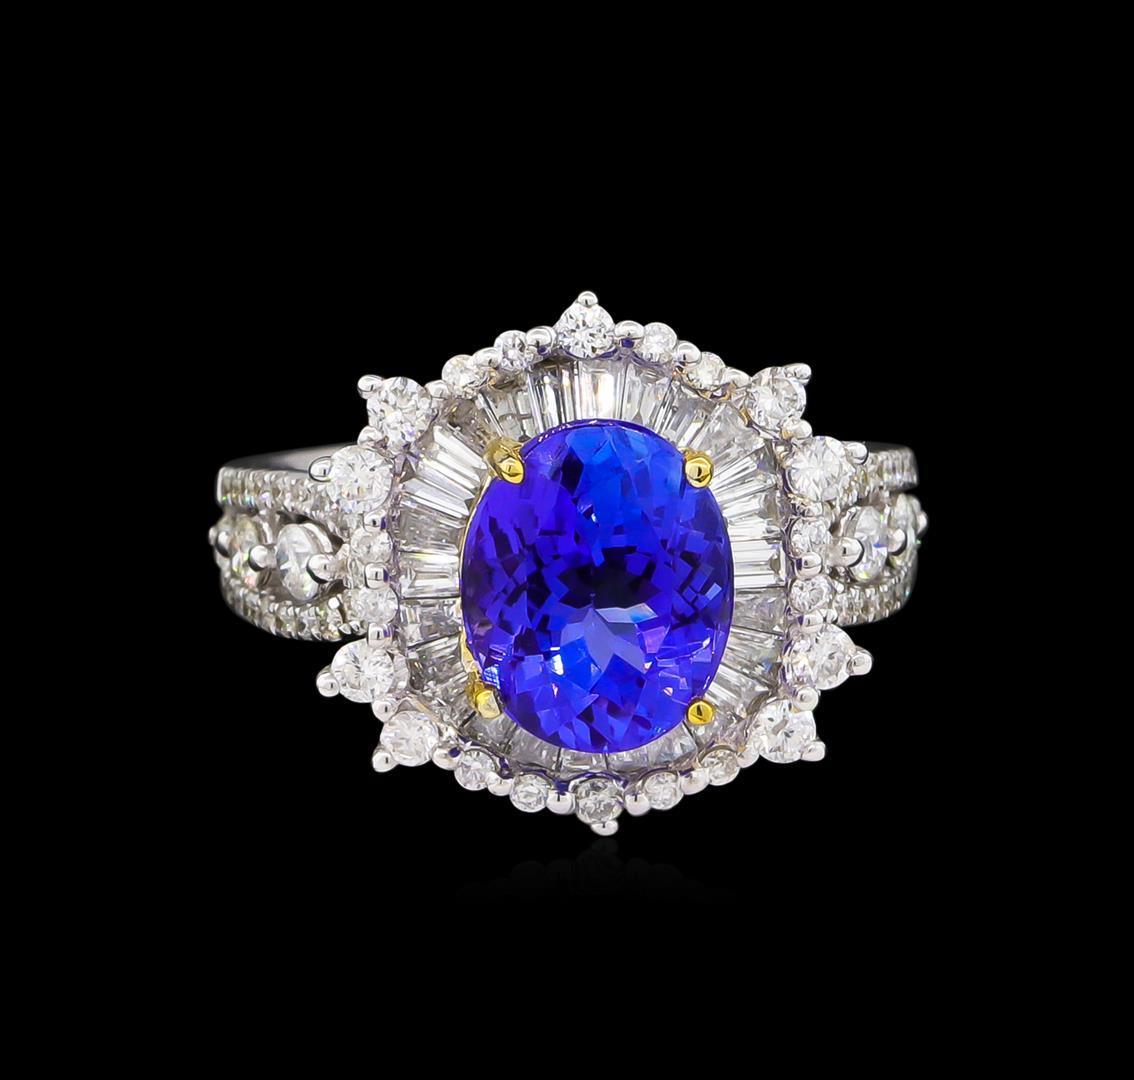 14KT Two-Tone Gold 3.15 ctw Tanzanite and Diamond Ring